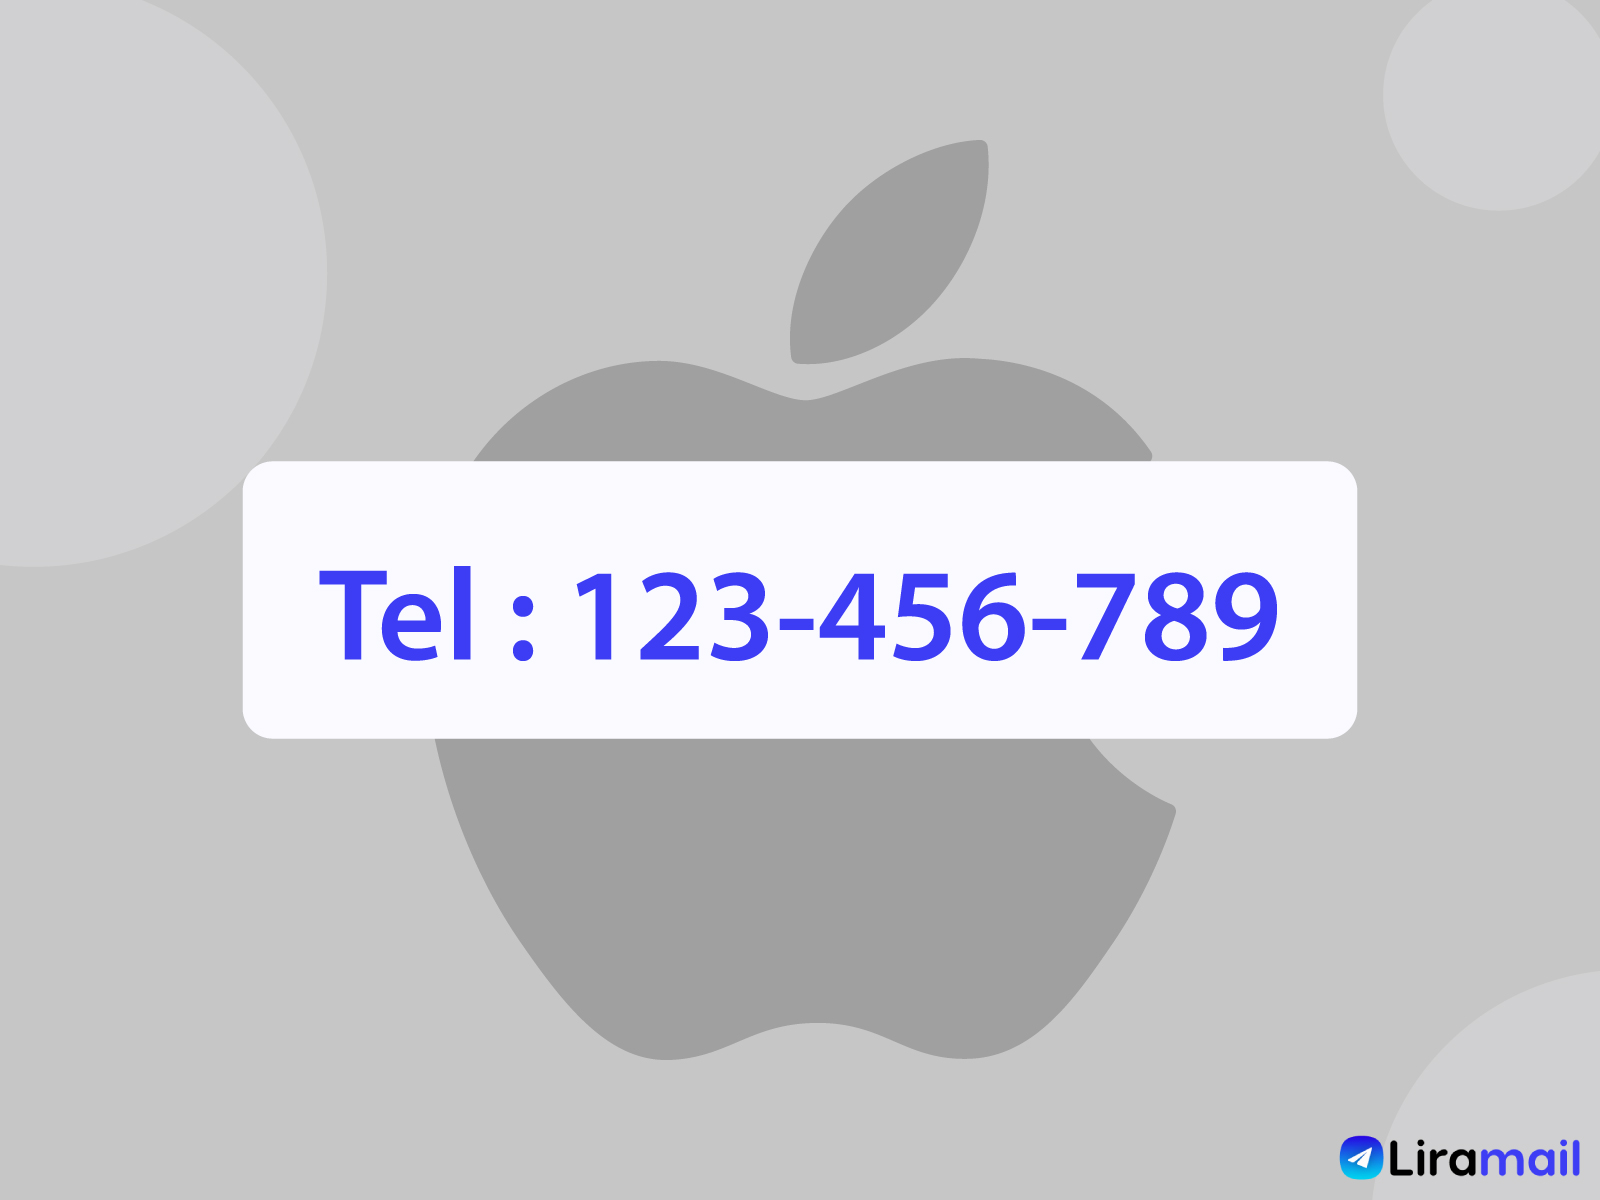 4 ways to fix iPhone numbers converted into blue links in the email? 1